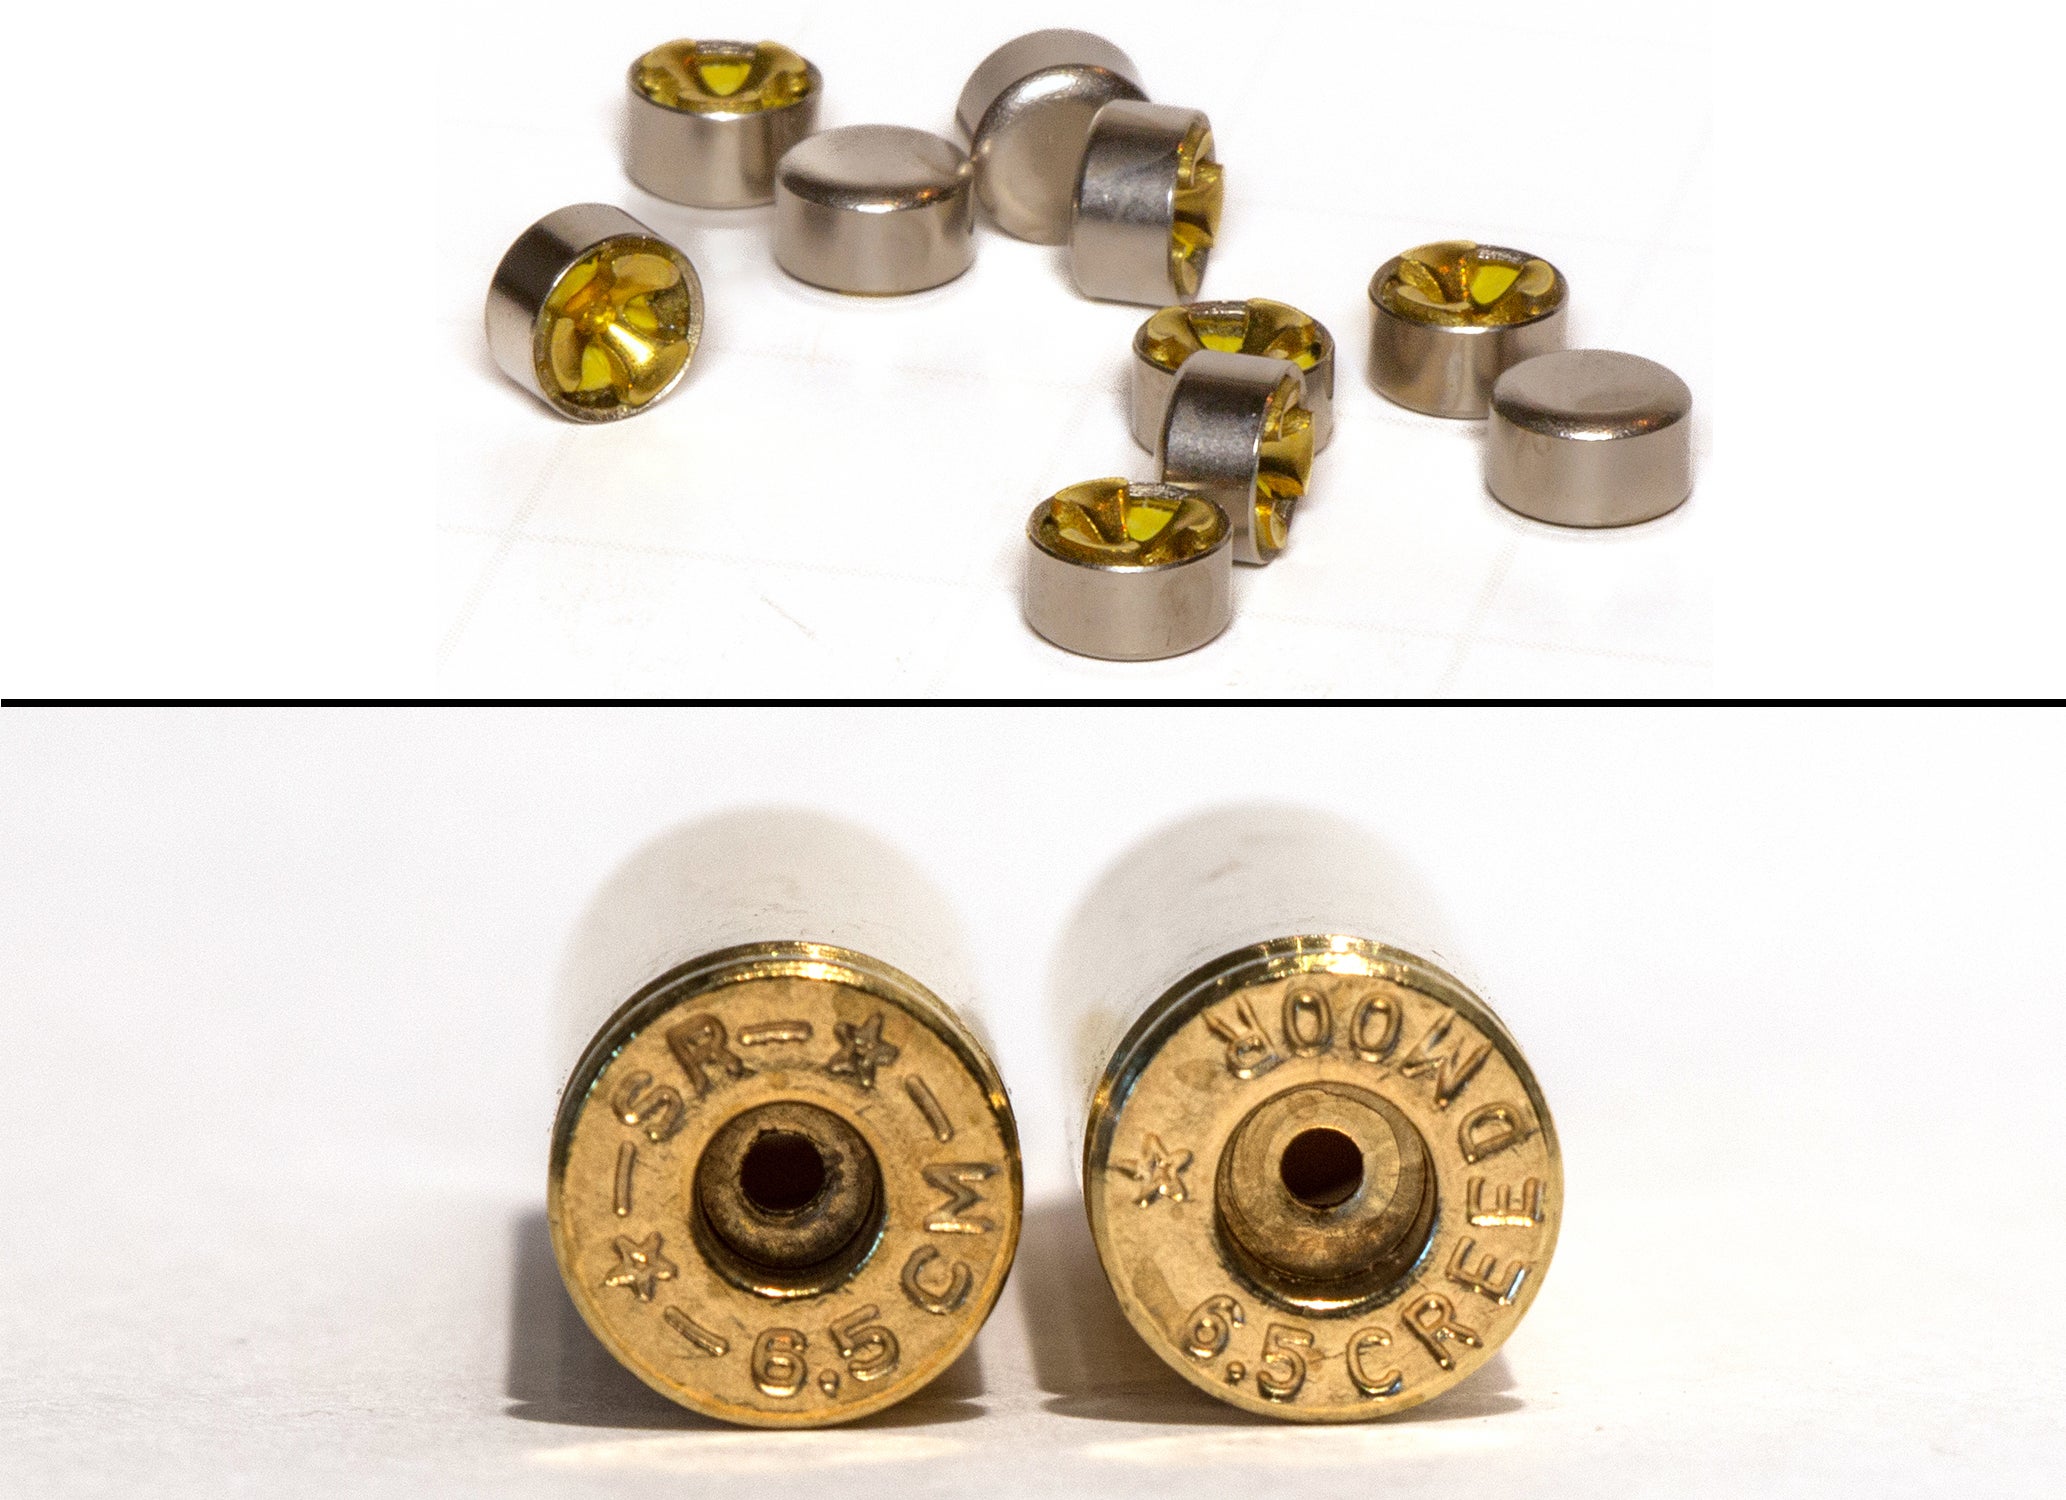 photo showing centerfire cartridge primers and the cartridge head